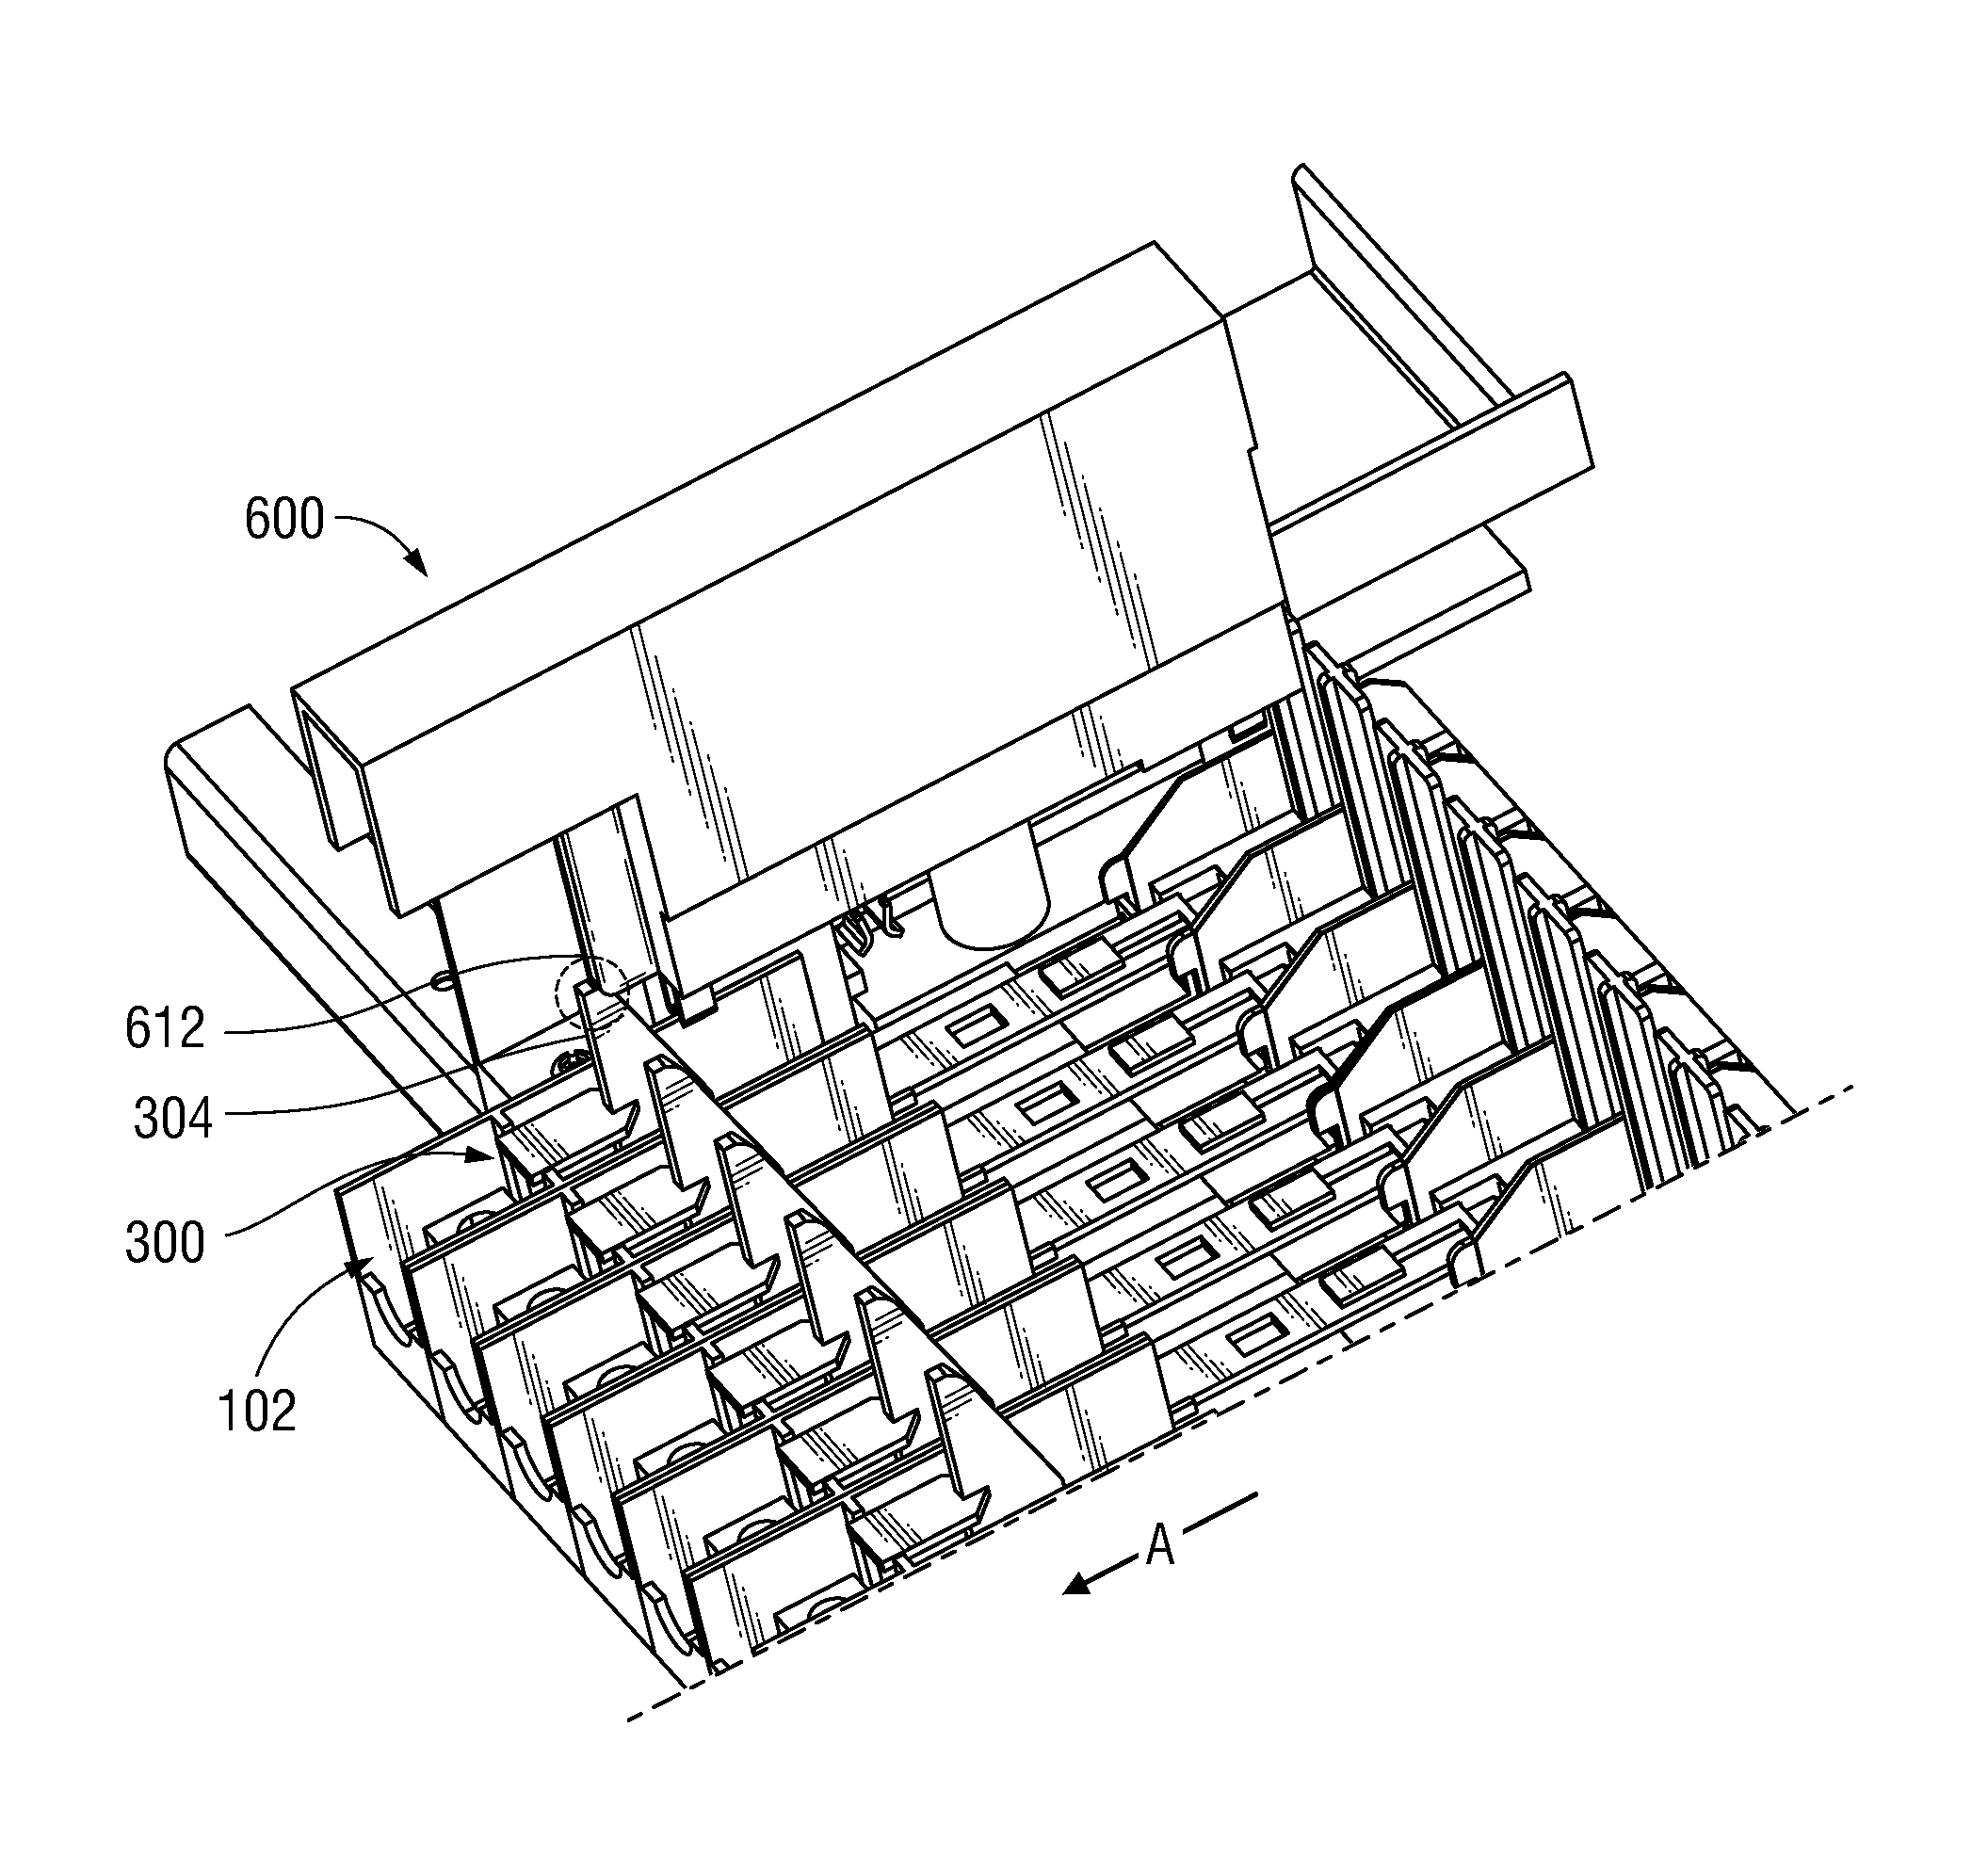 Breaker-operated electrical connection shutter for panelboards